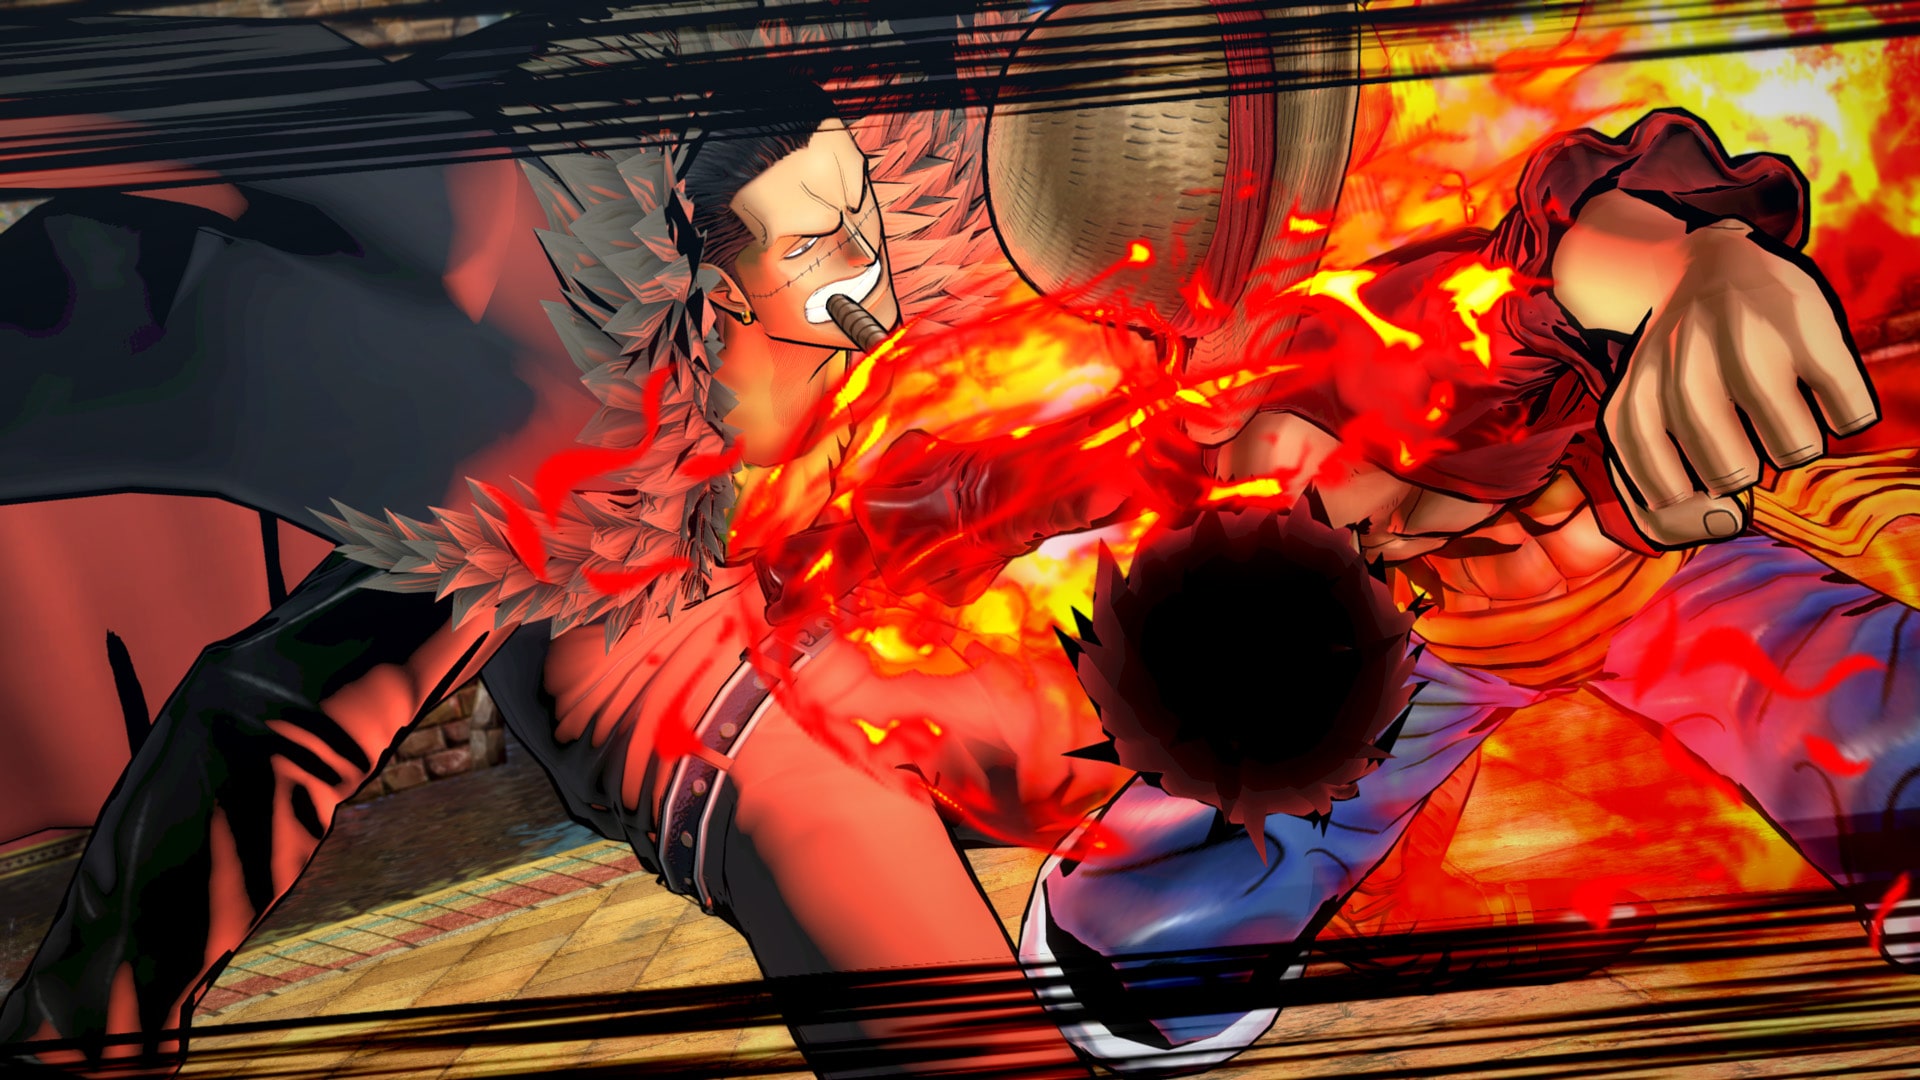 One Piece Burning Blood — Gold Edition on PS4 — price history, screenshots,  discounts • USA